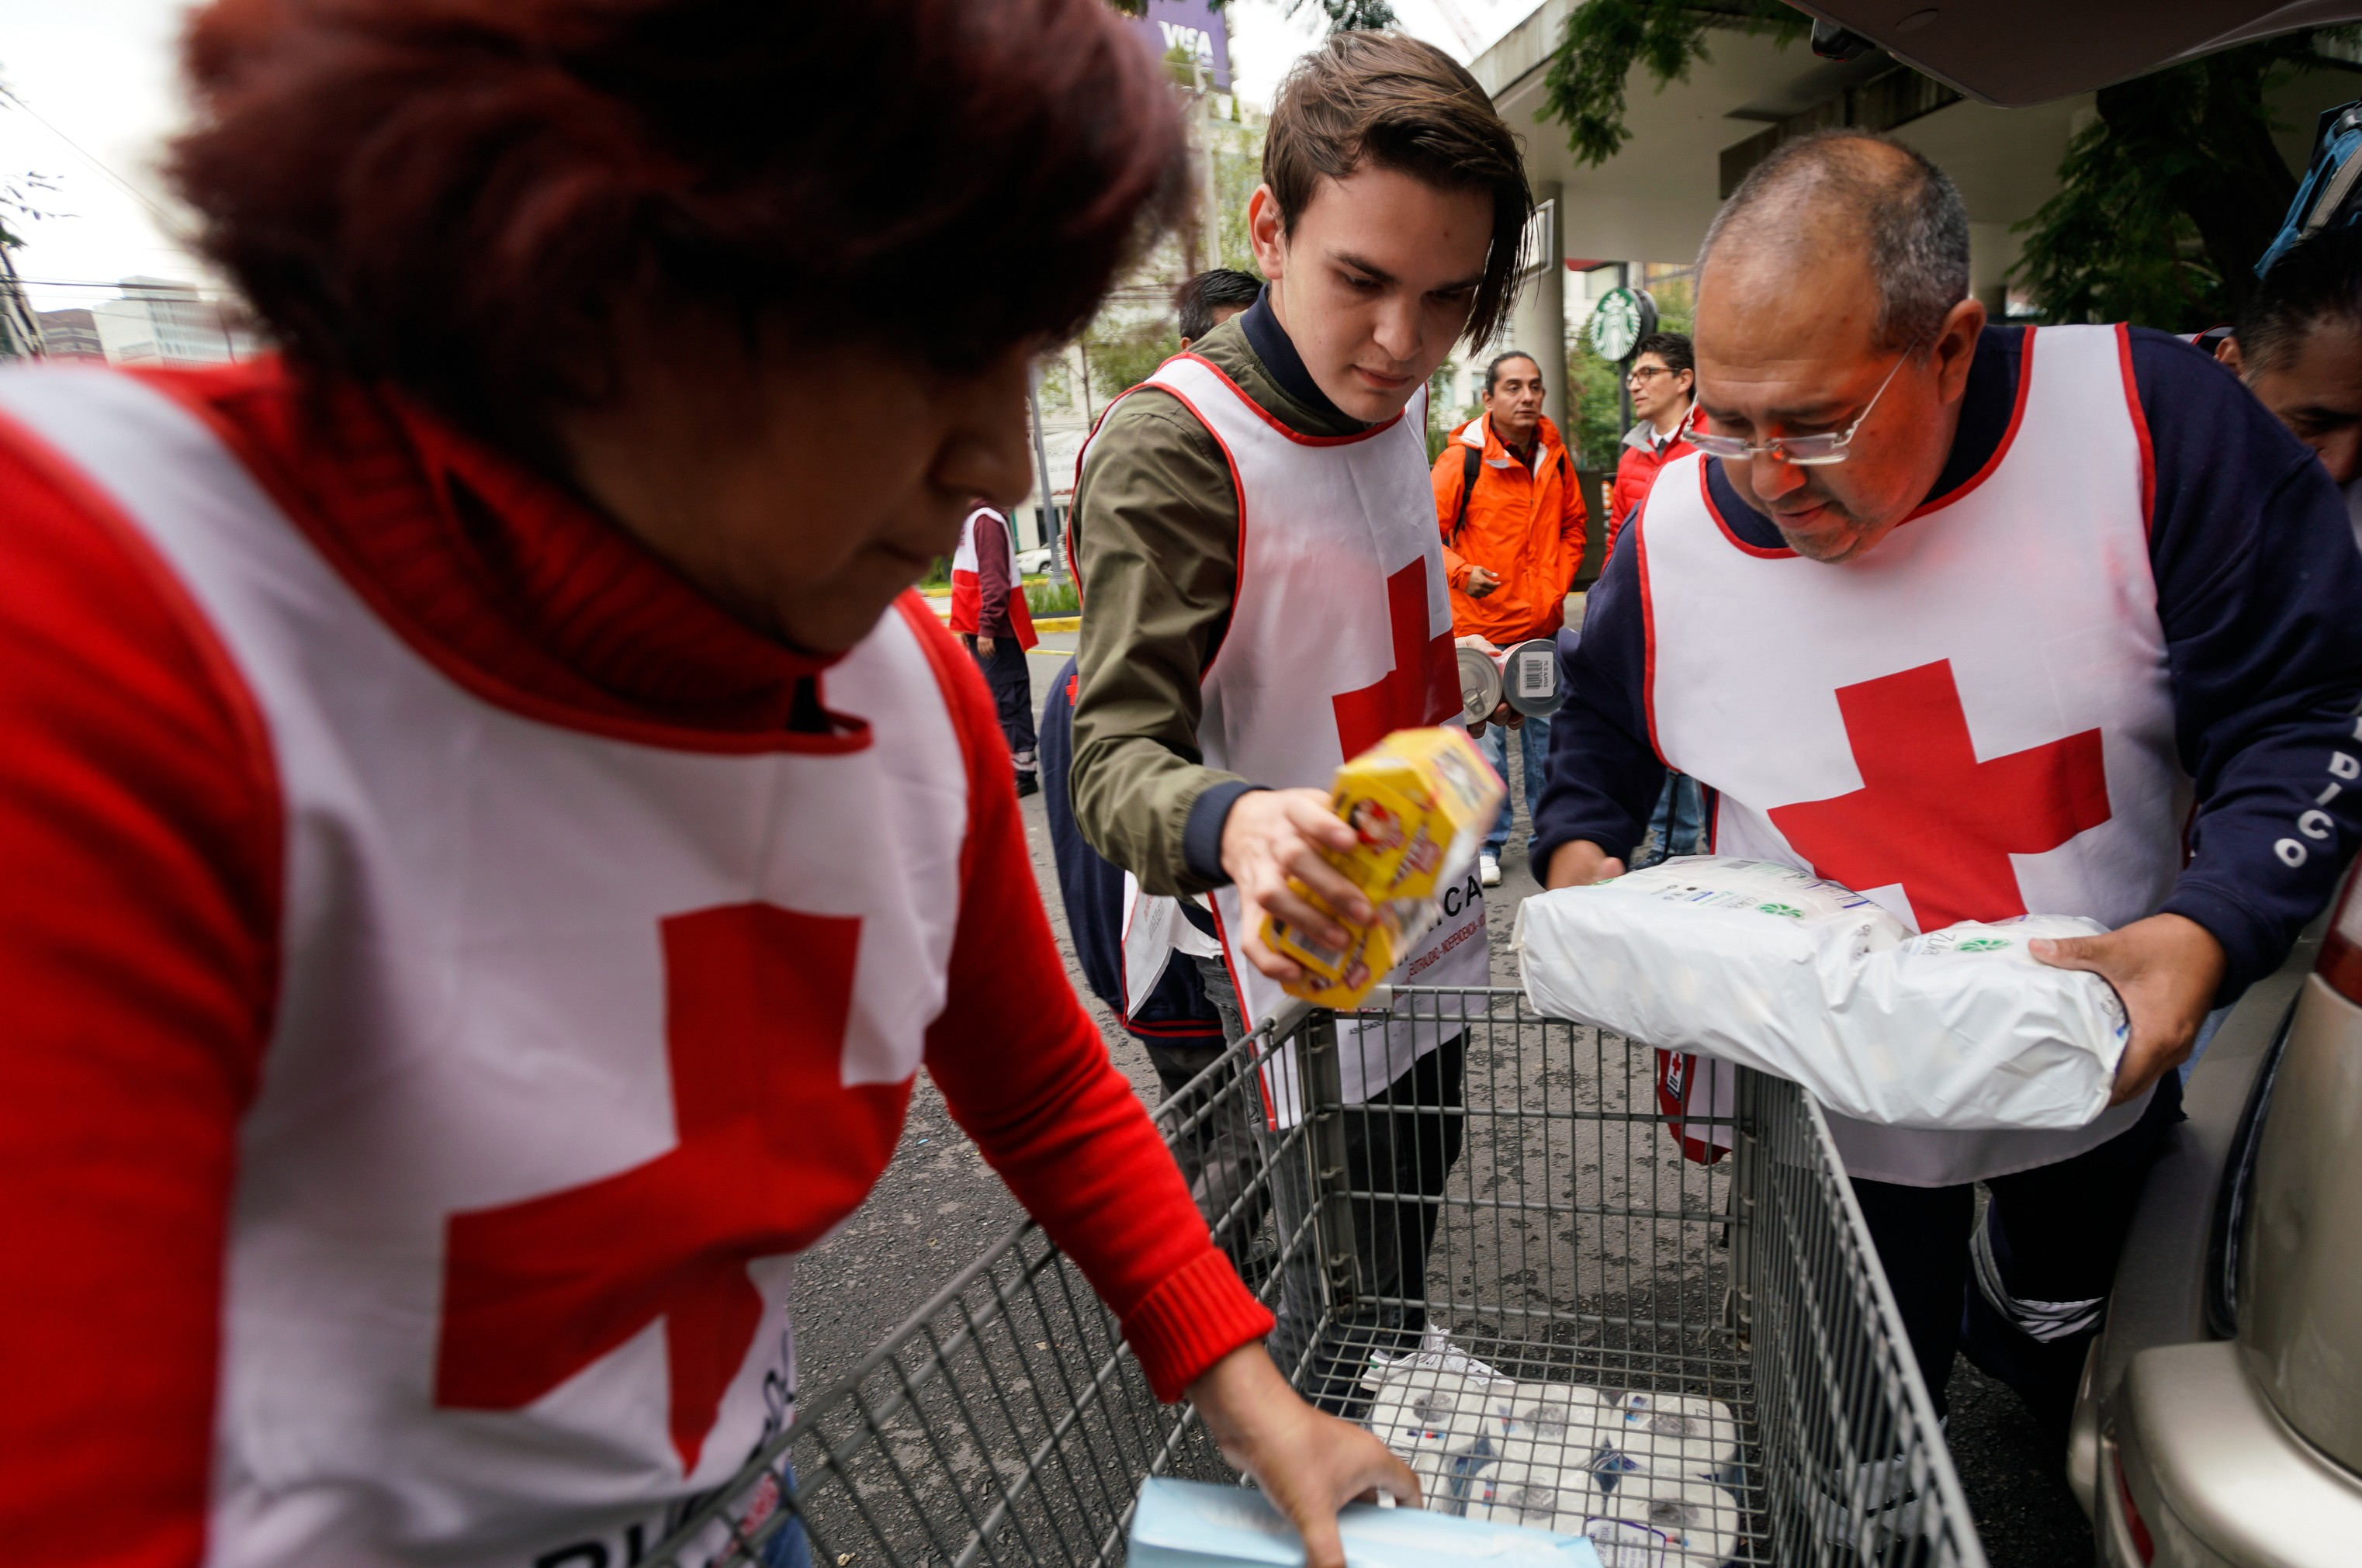 Red Cross volunteers receive donations for people affected by the powerful earthquake in Mexico earlier this month. Data can be used to coordinate disaster relief, among other uses. Photo: Xinhua